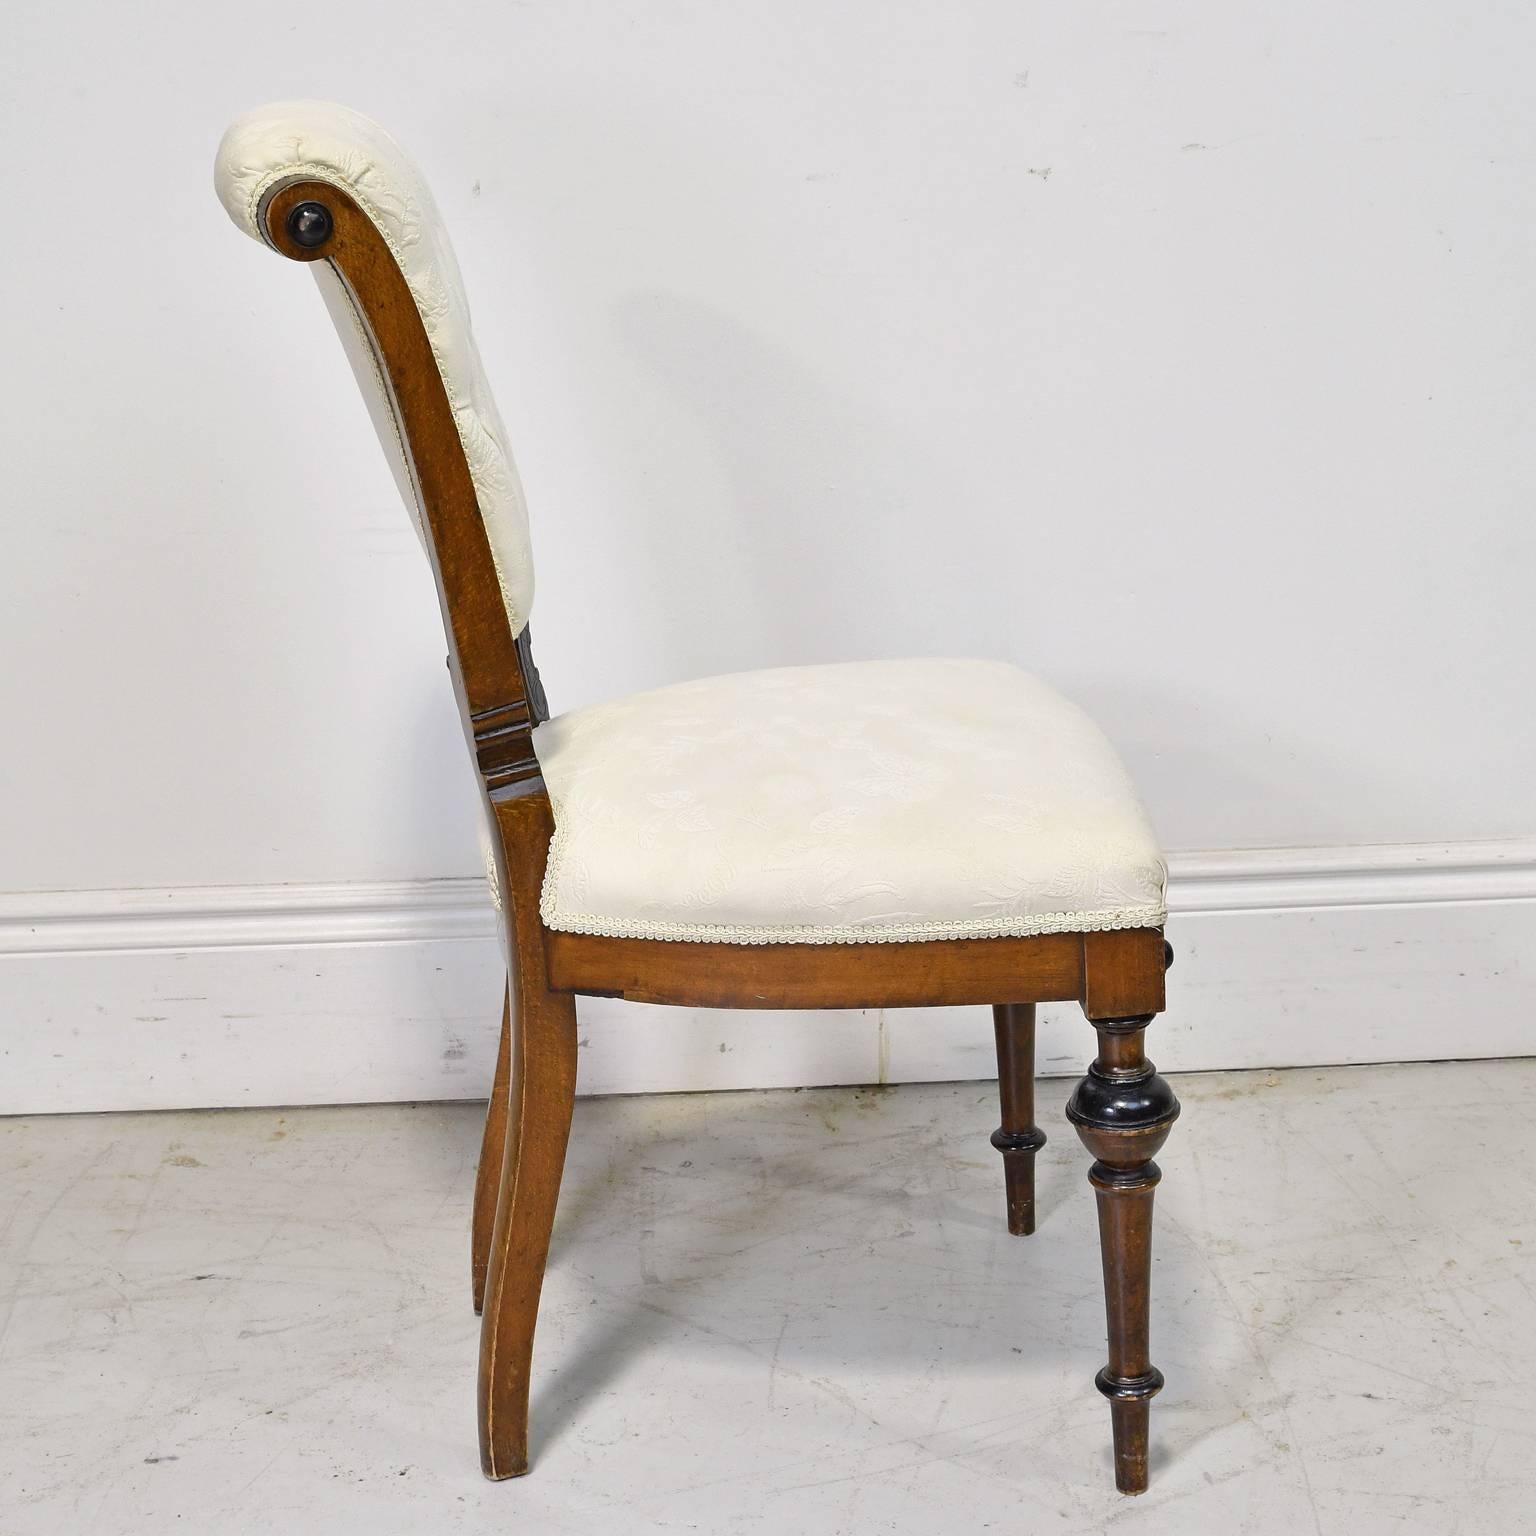 19th Century Walnut Side Chair with Ebonized Bandings, Upholstered Seat and Back 1